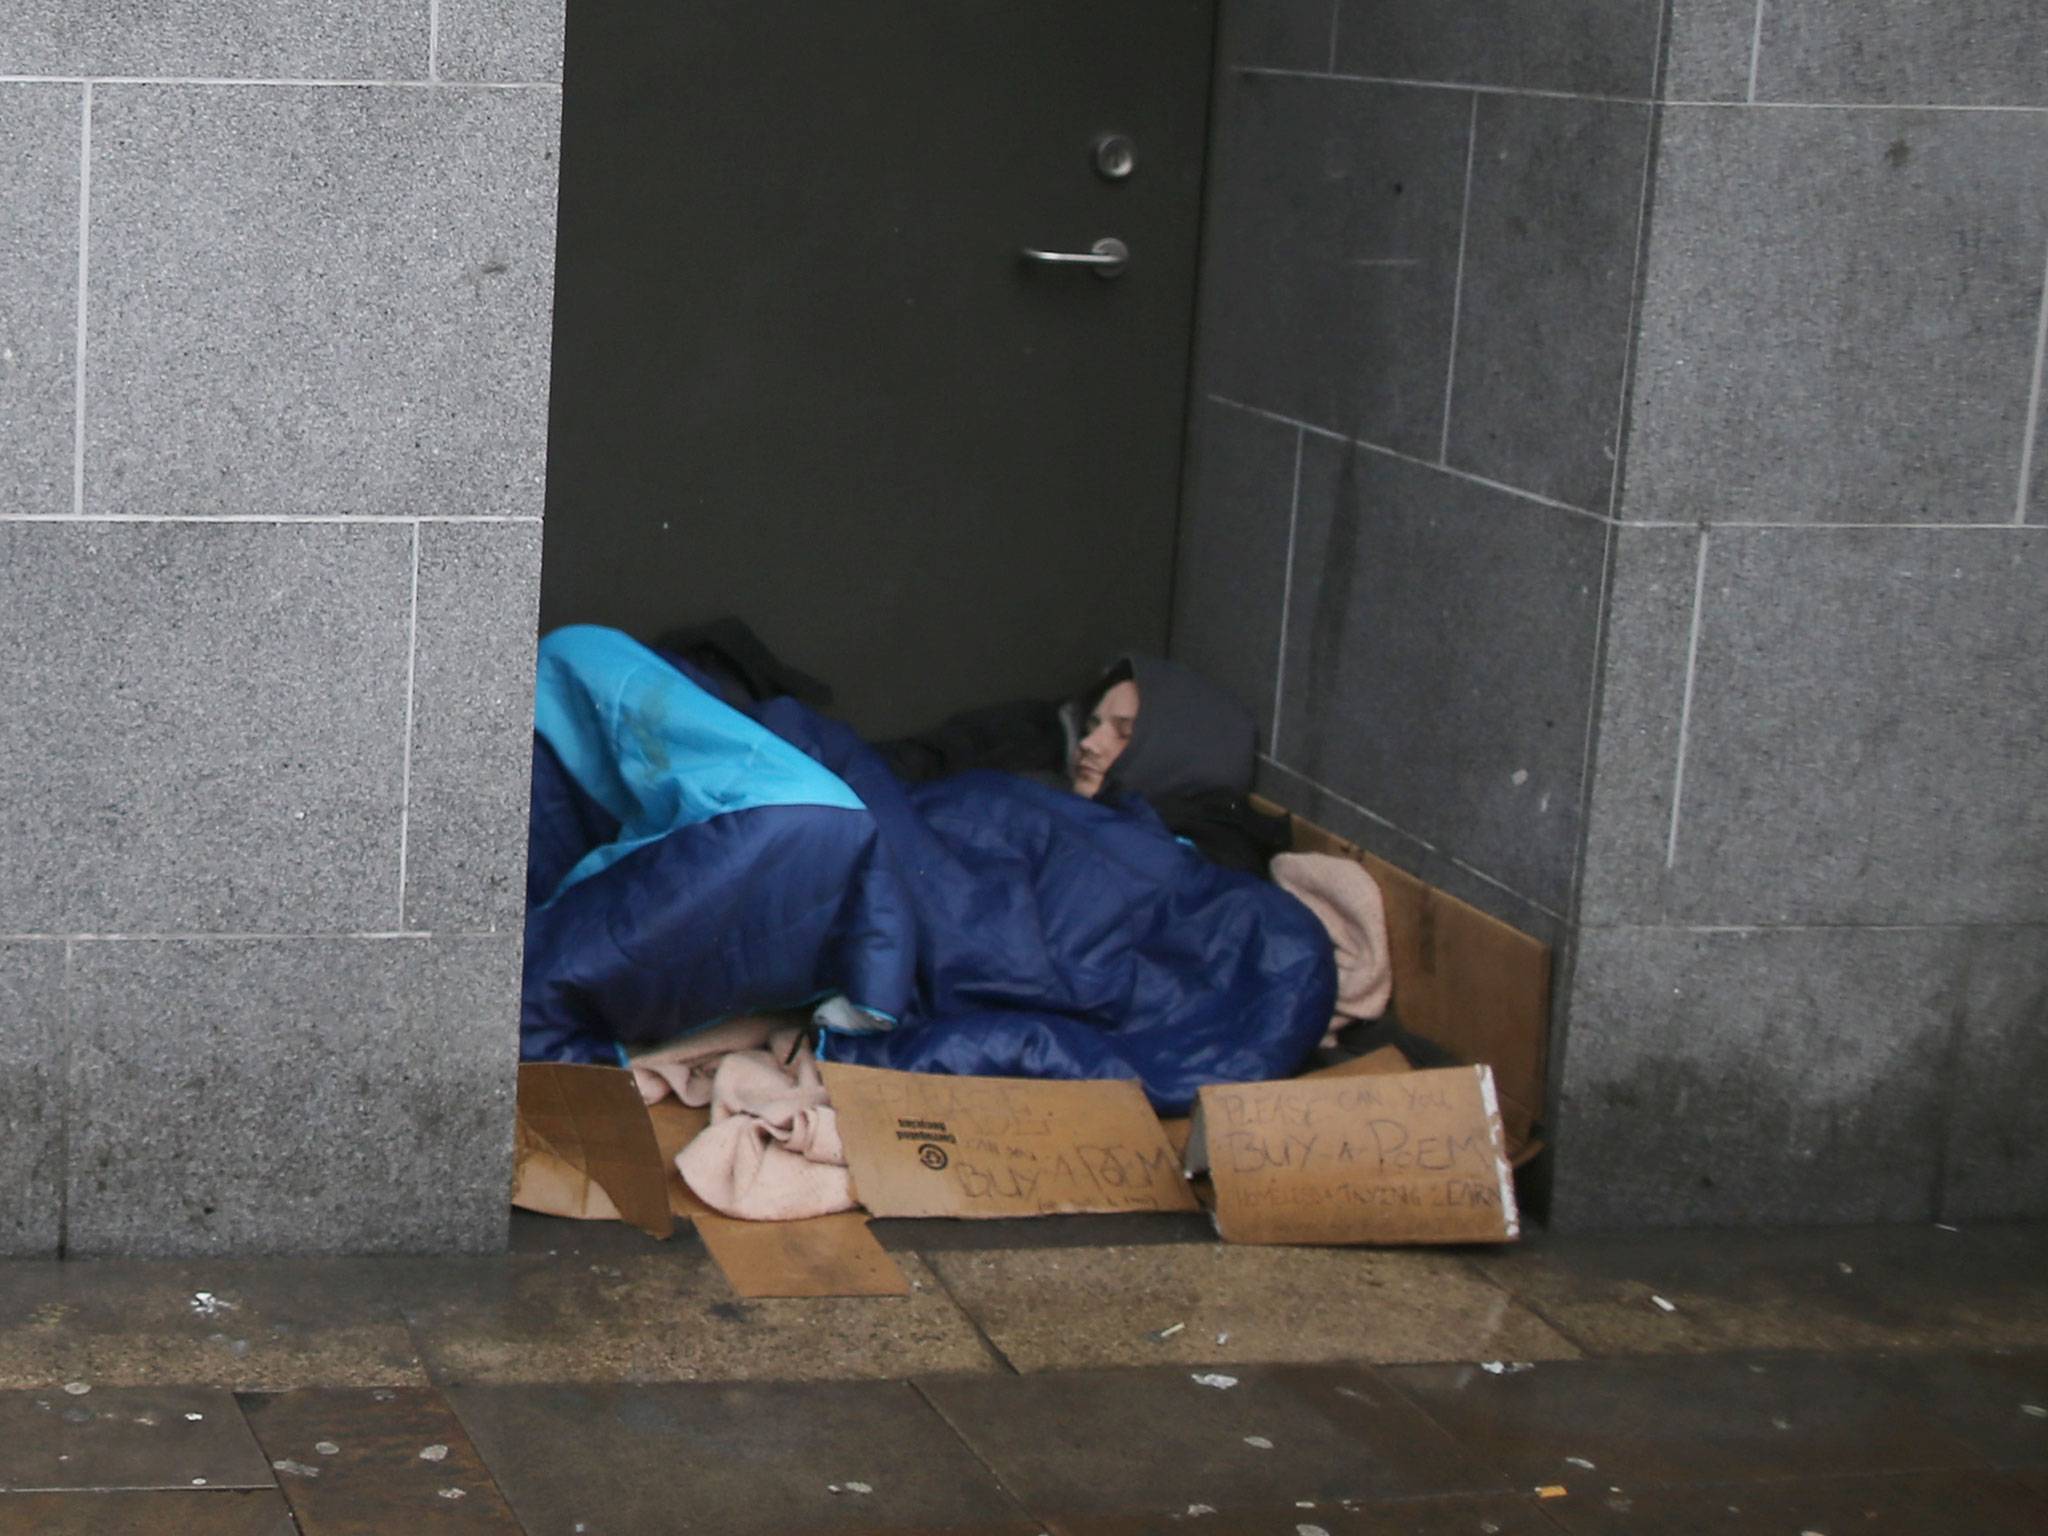 One in every 154 people in Manchester are homeless says Shelter report